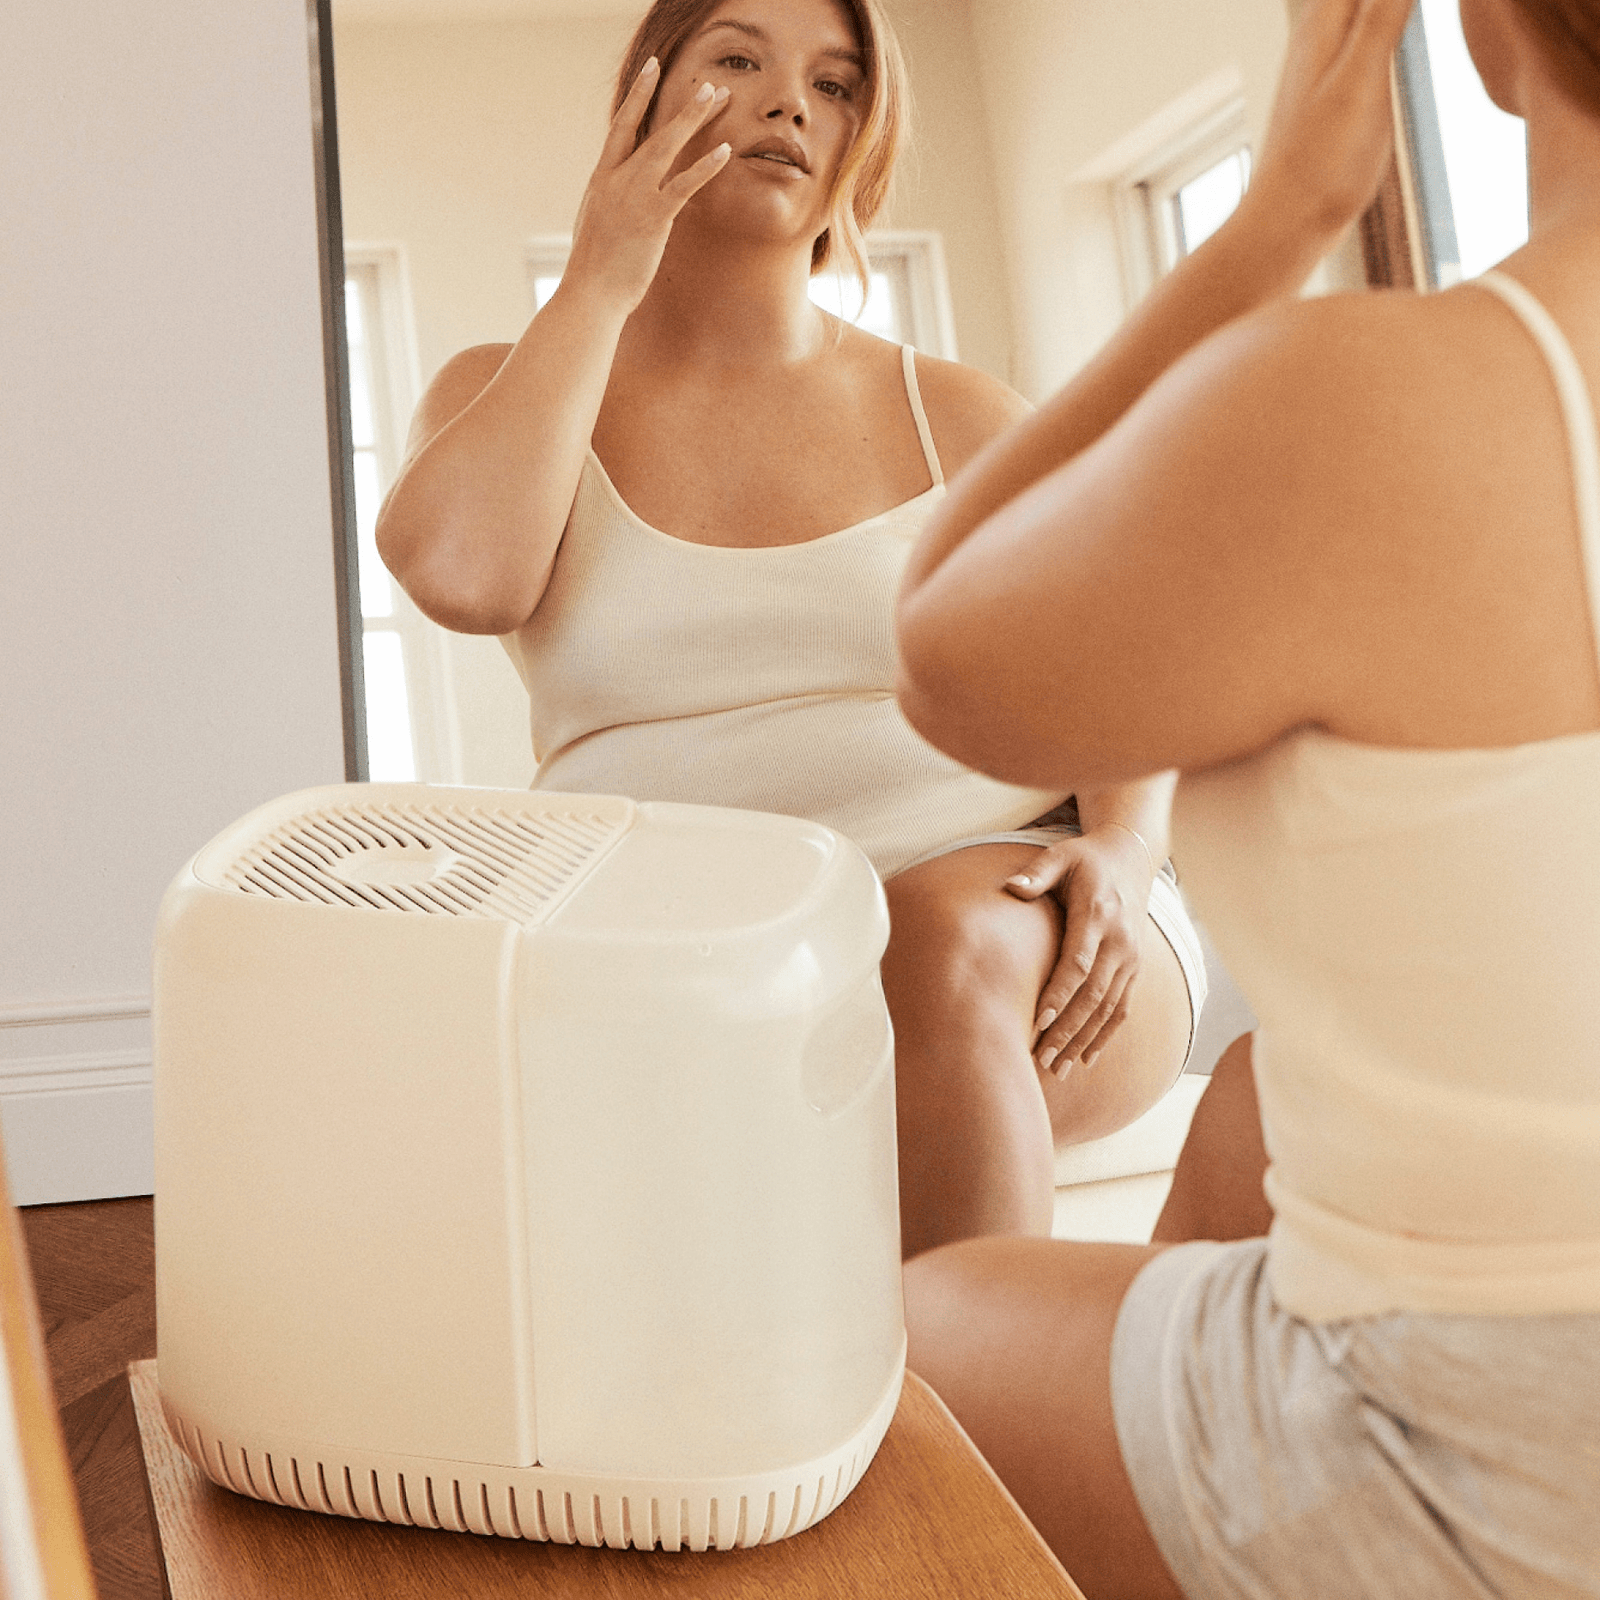 Bedside Humidifier | Lifestyle, Woman sitting next to a Canopy Bedside Humidifier and admiring her glowing skin in the mirror